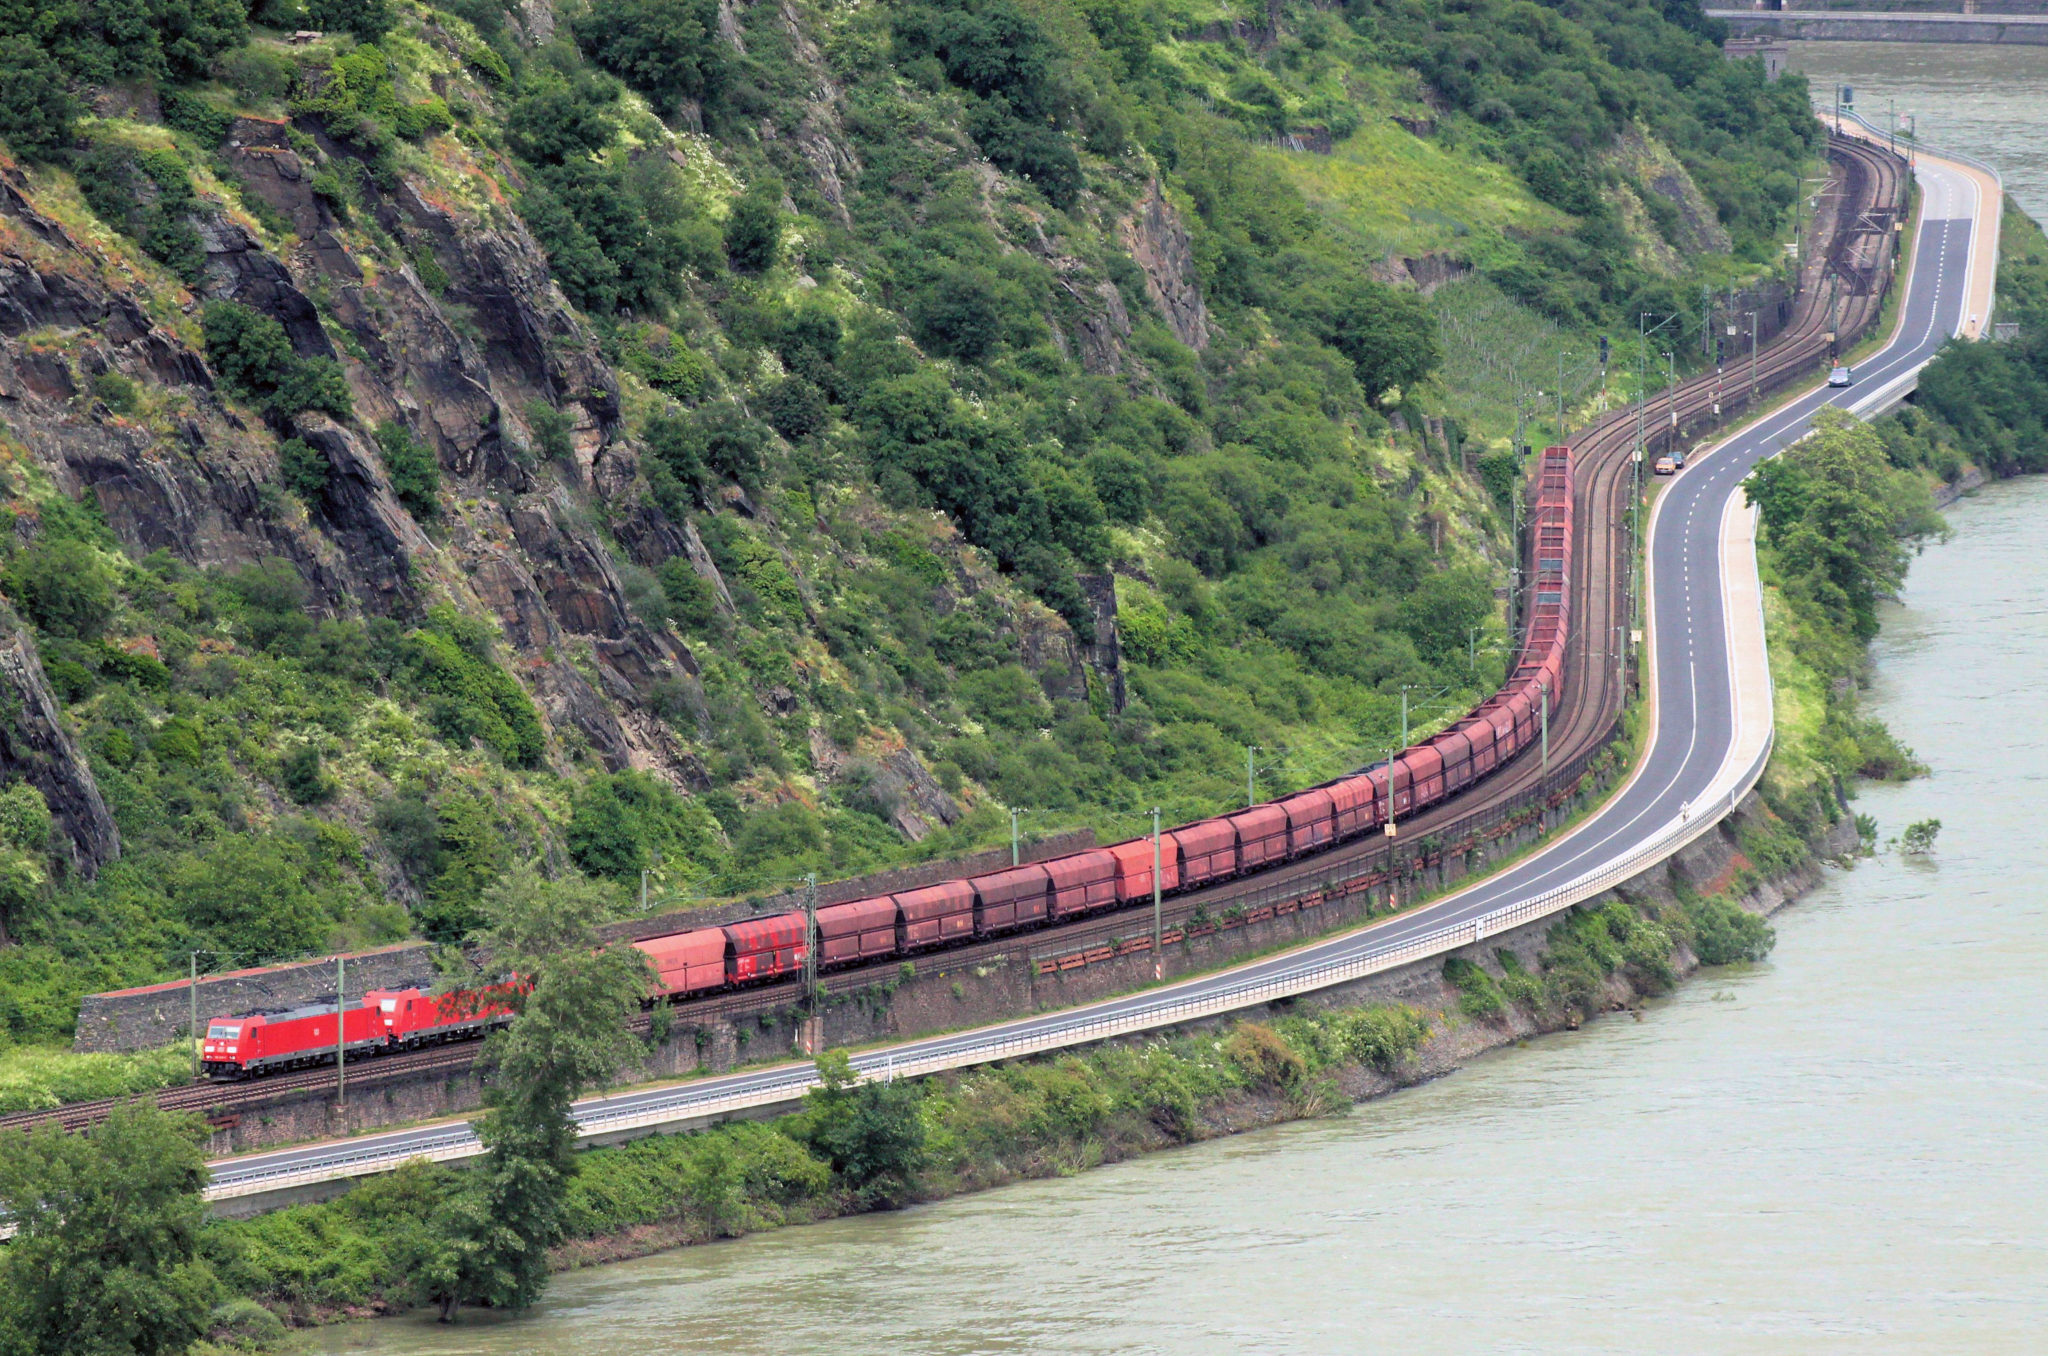 DB Cargo Freight Train in the Central Rhine Valley